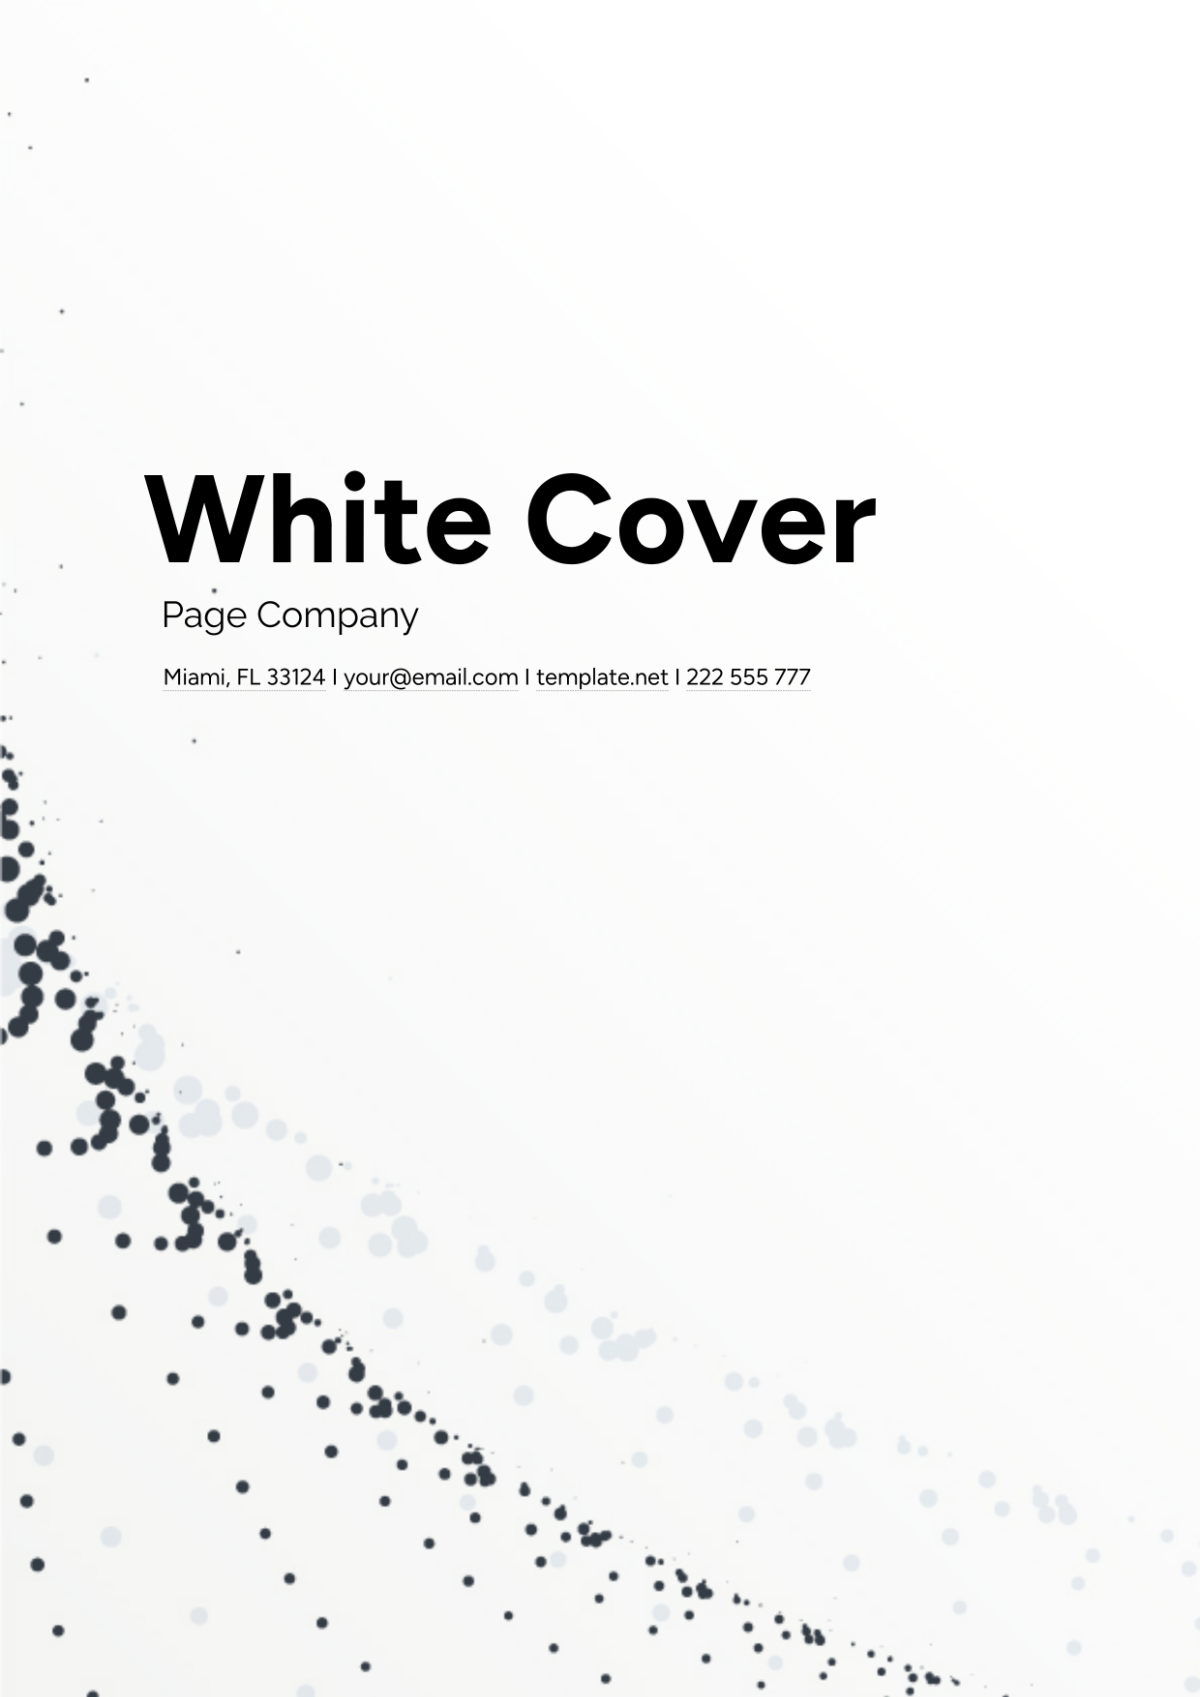 White Cover Page Company